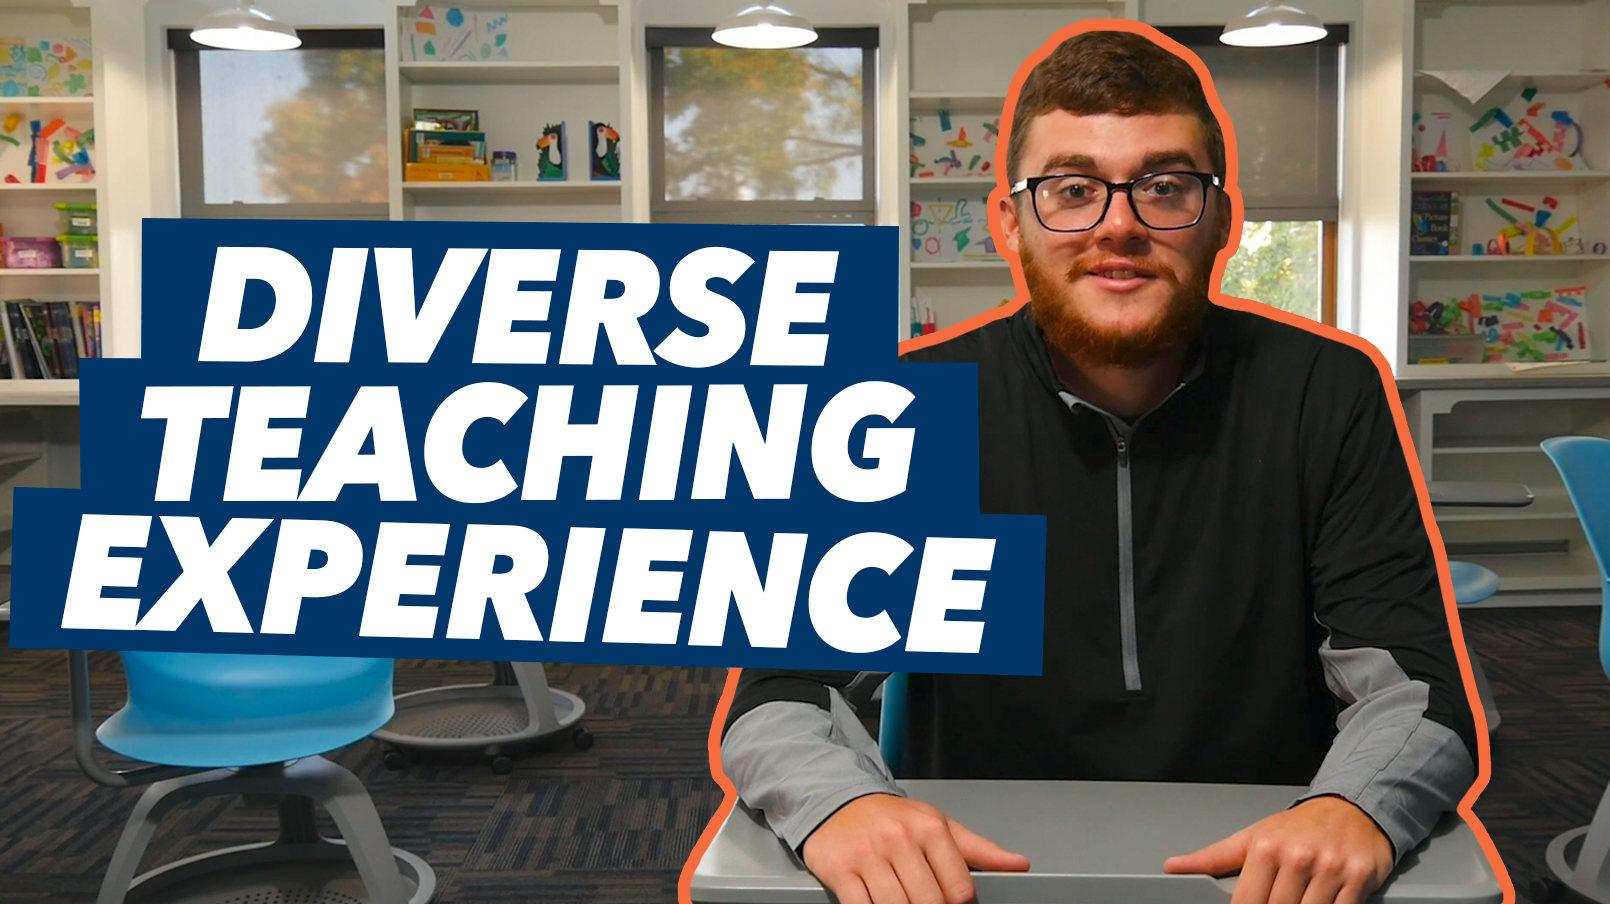 Student testimonial video - diverse education experience